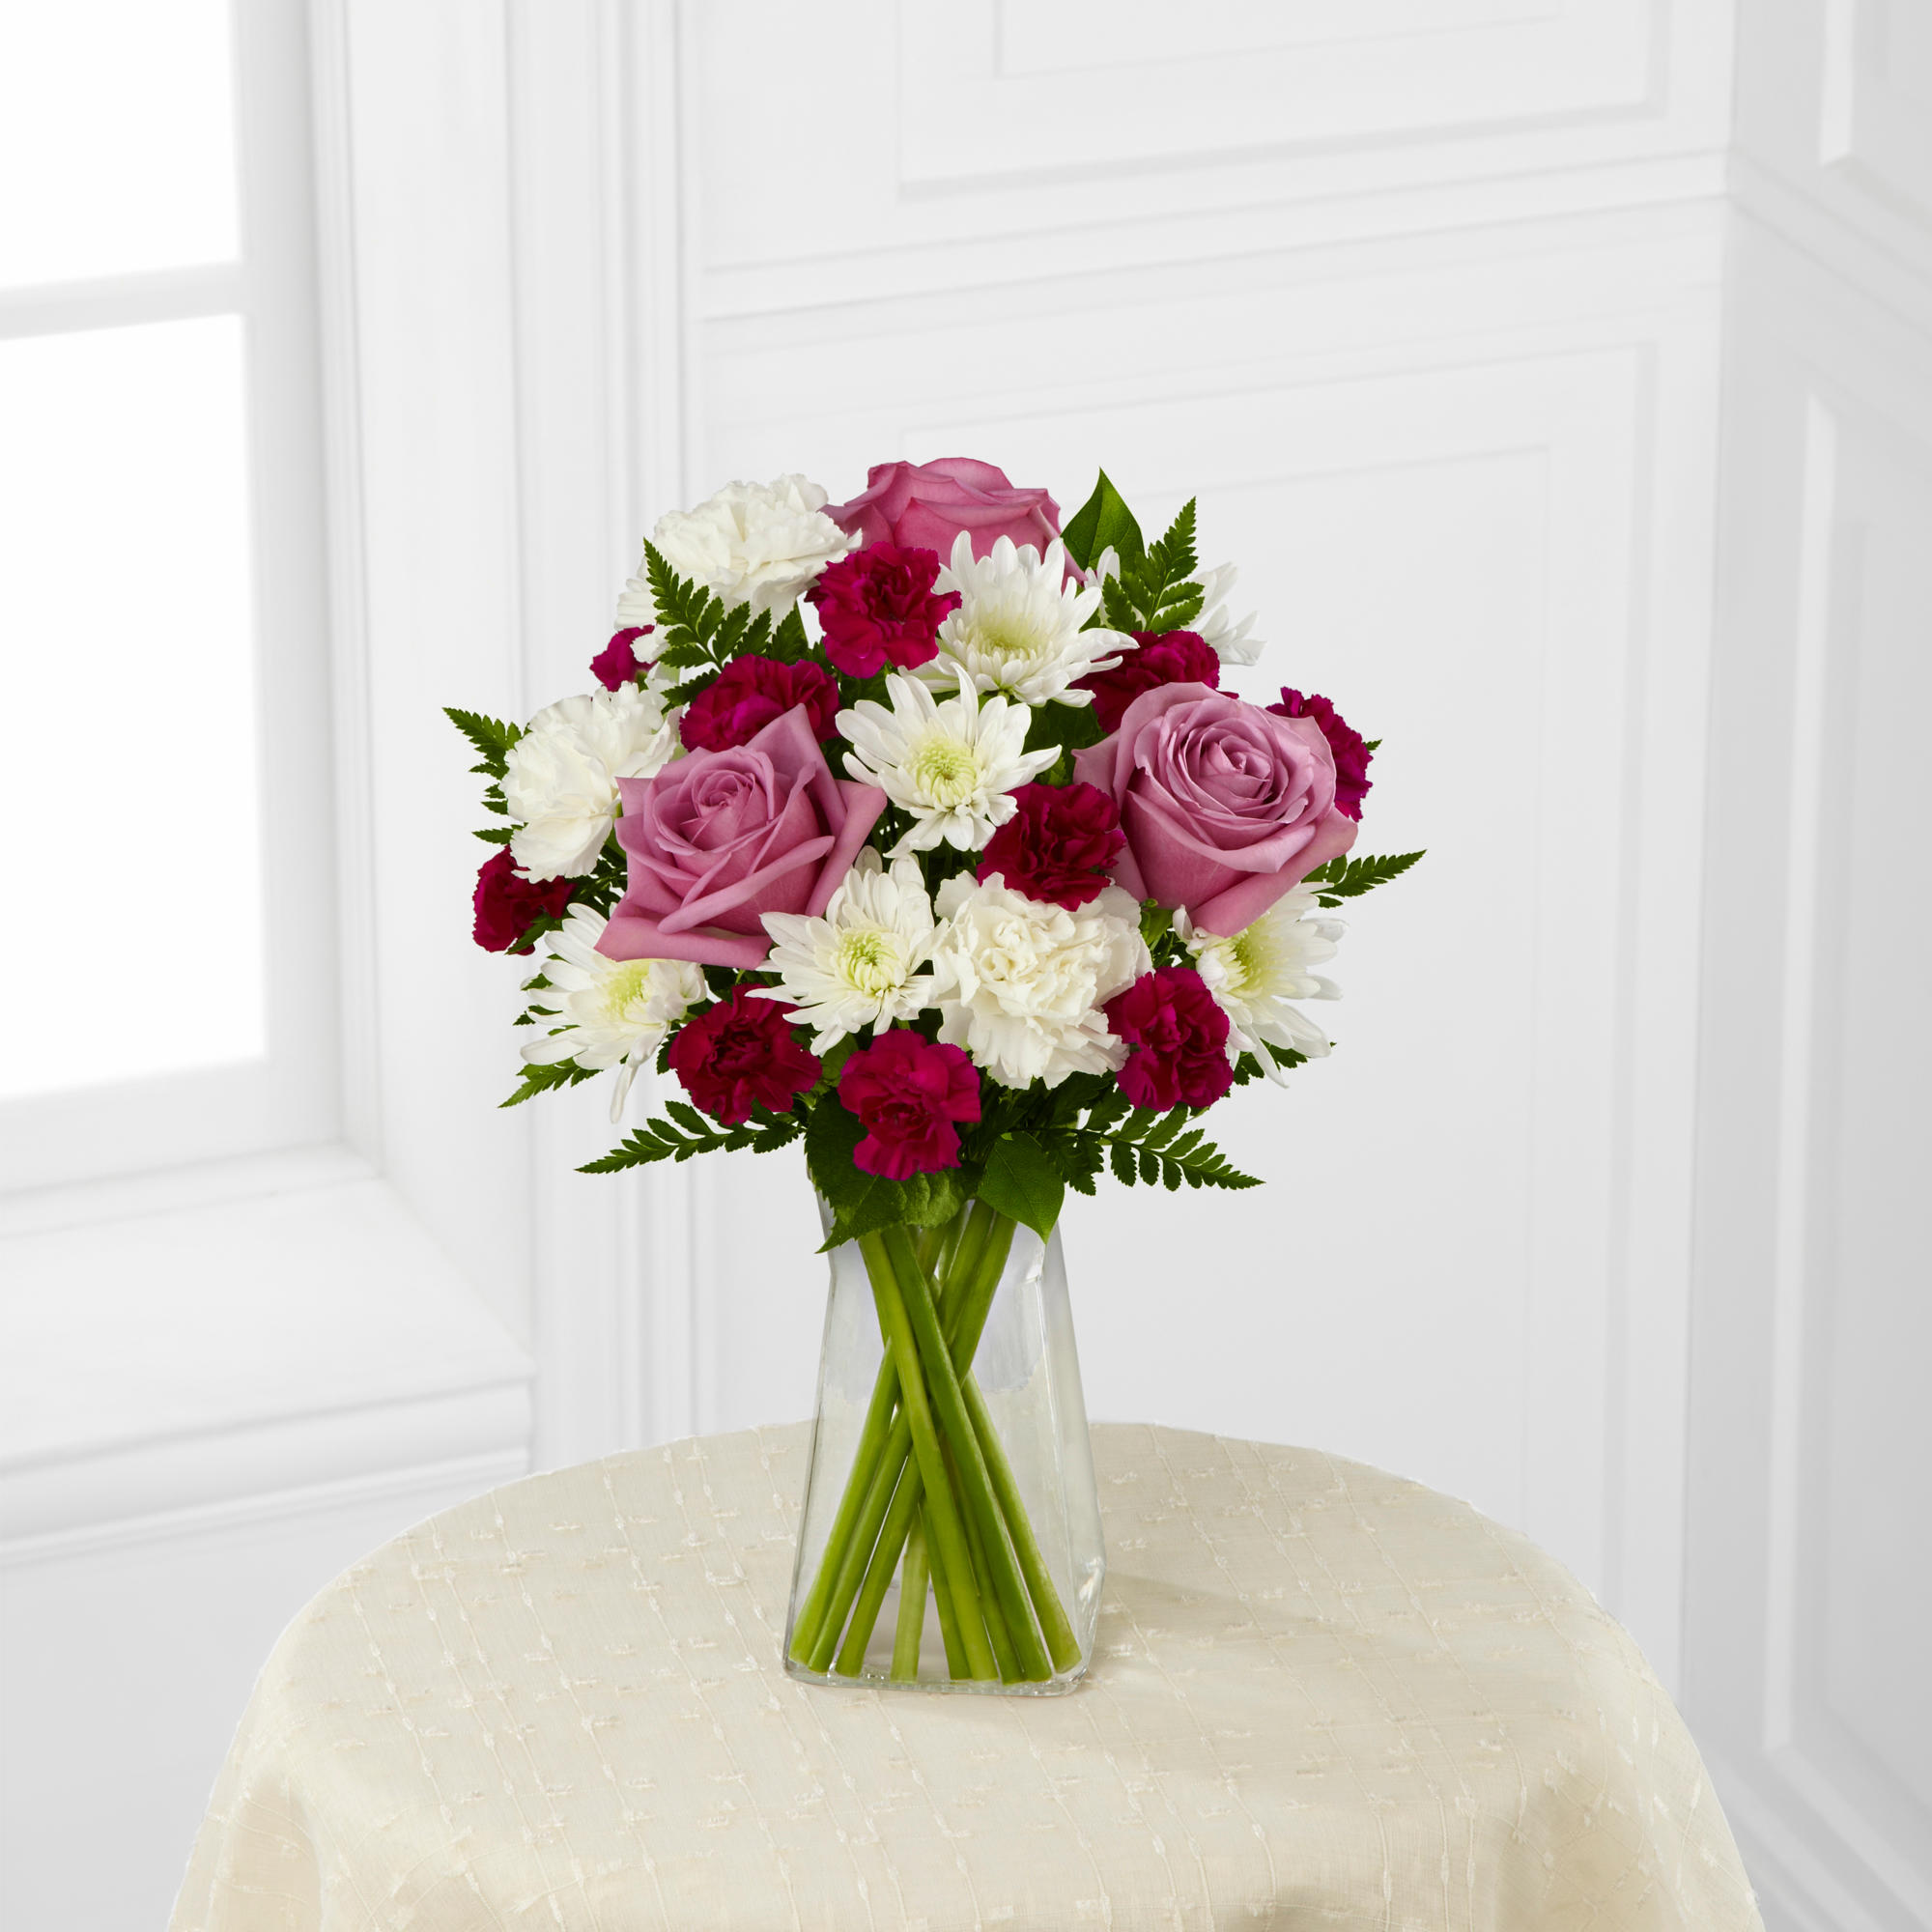 Four Seasons Flowers & Gifts Photo